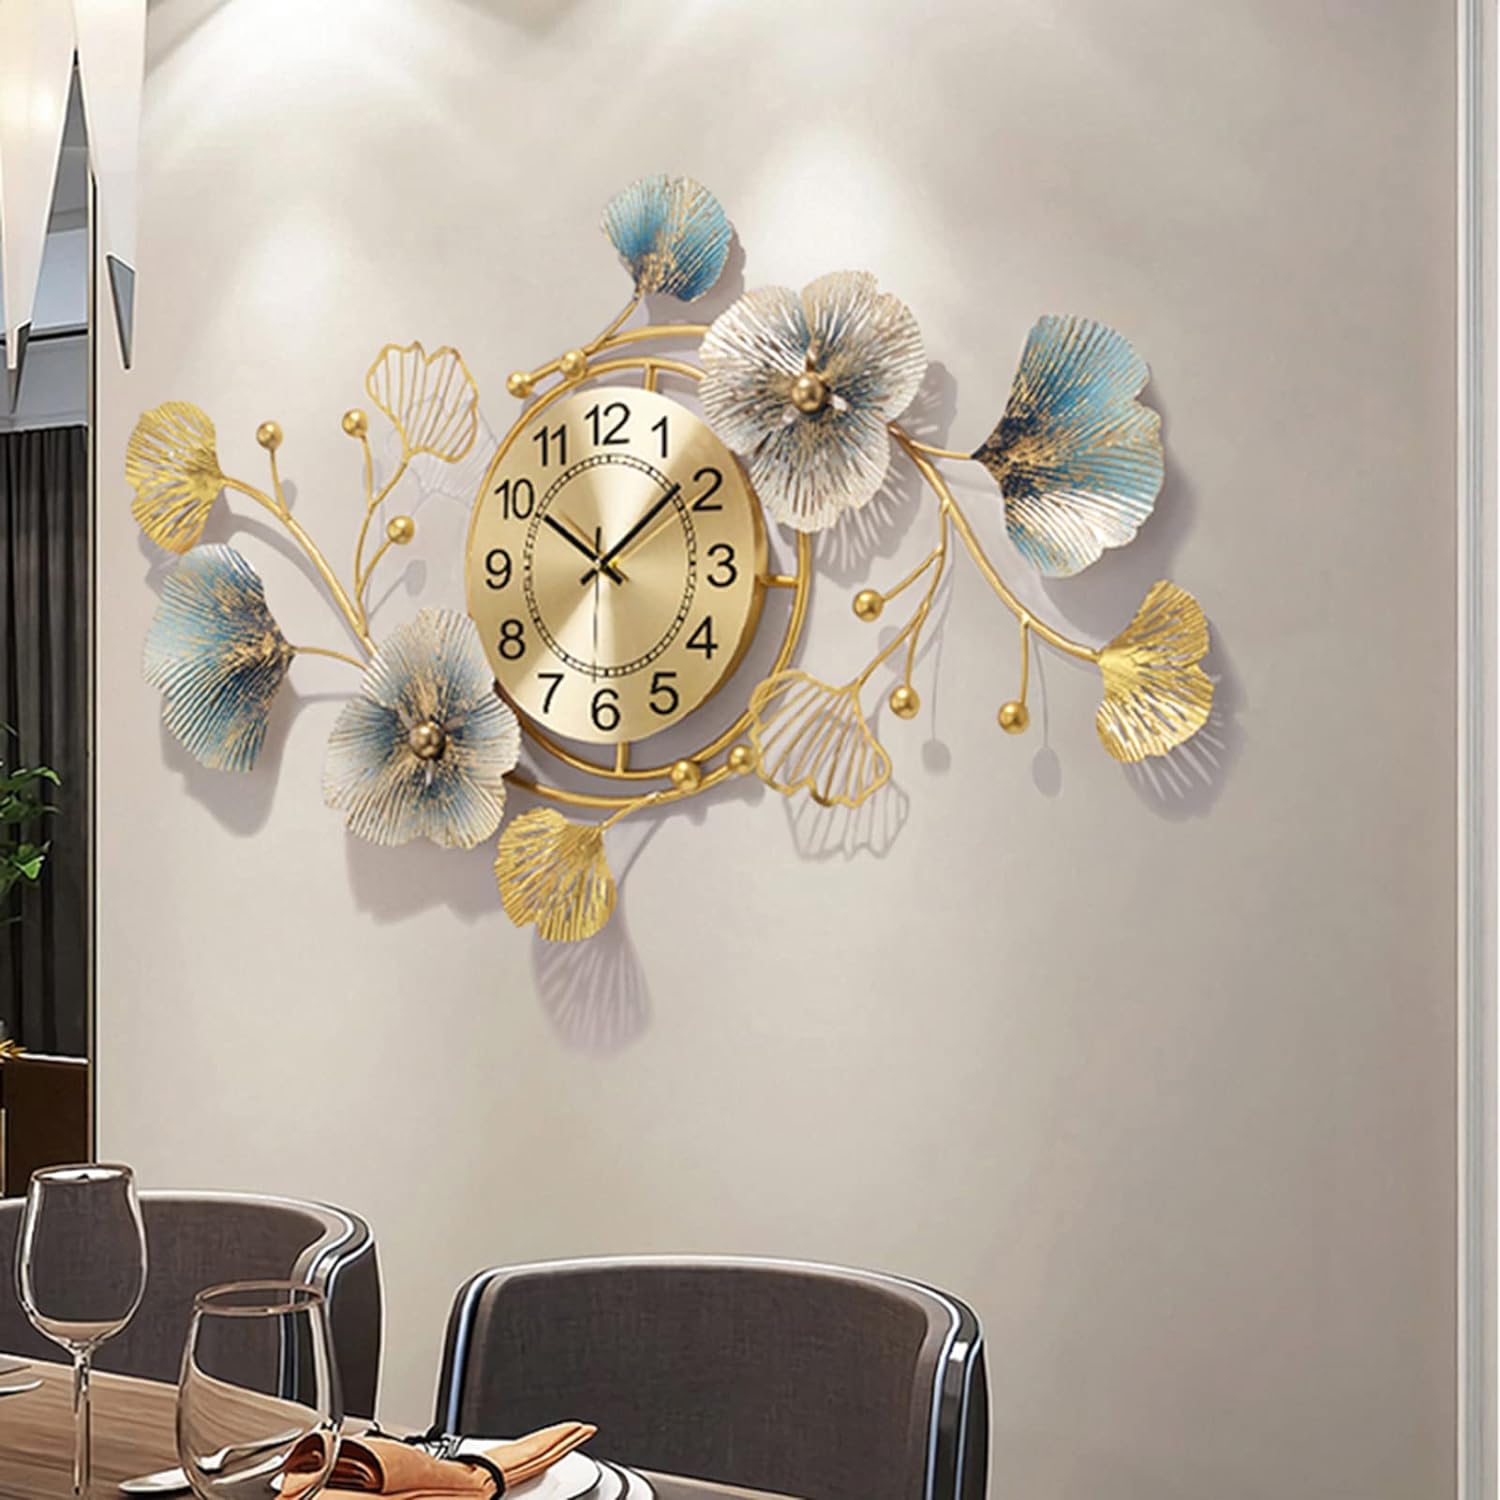 Mroinss Large Decorative Wall Clock Review